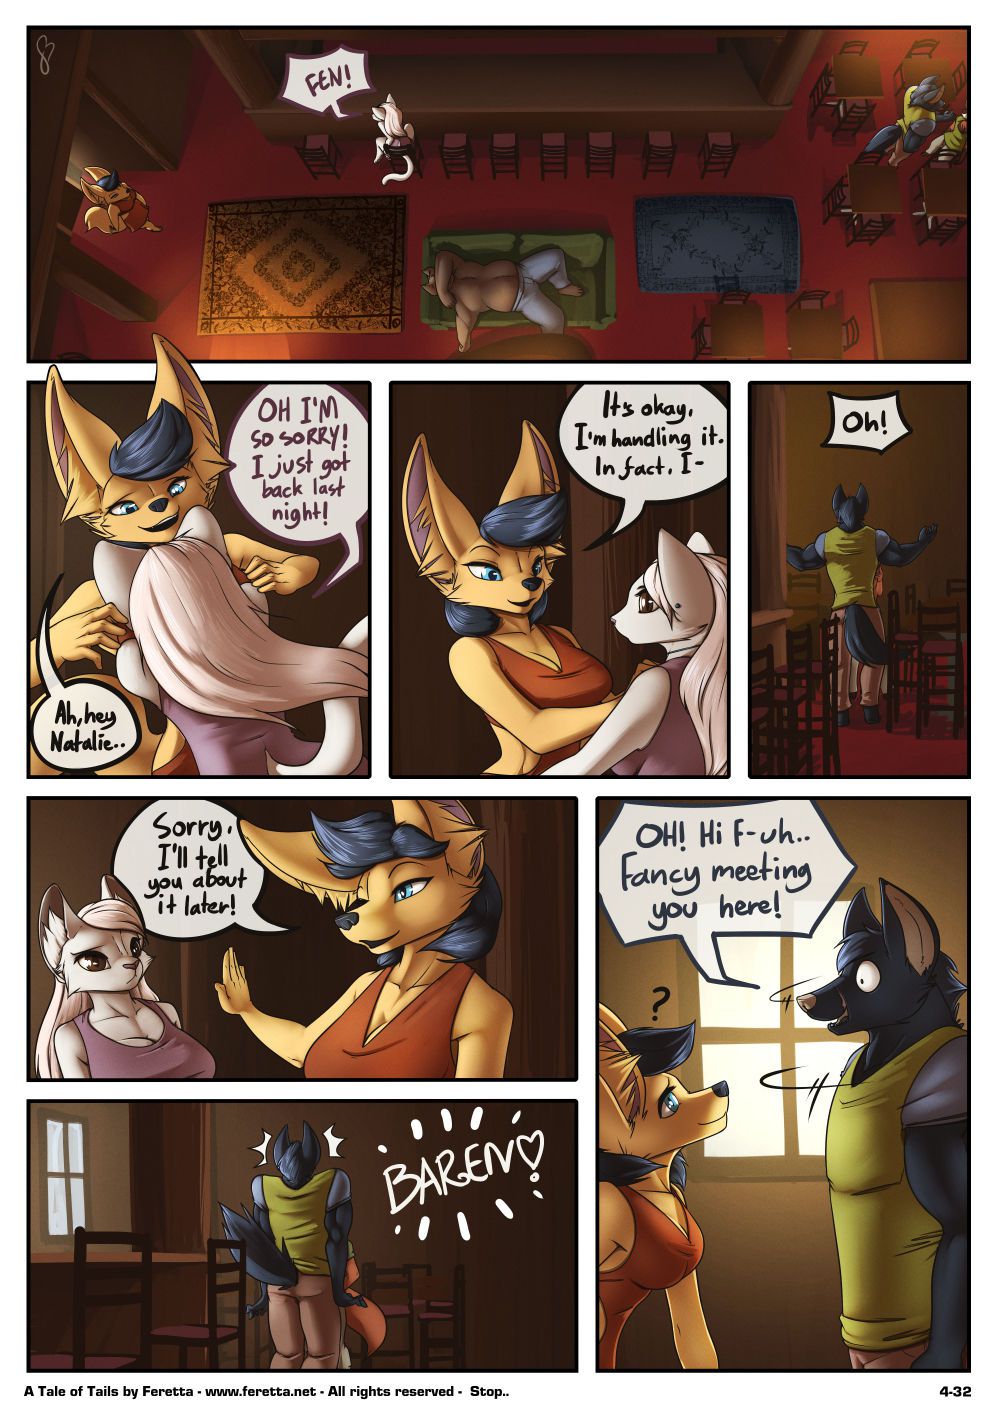 [Feretta] A Tale of Tails: Chapter 4 -  Matters of the mind [Ongoing] 32